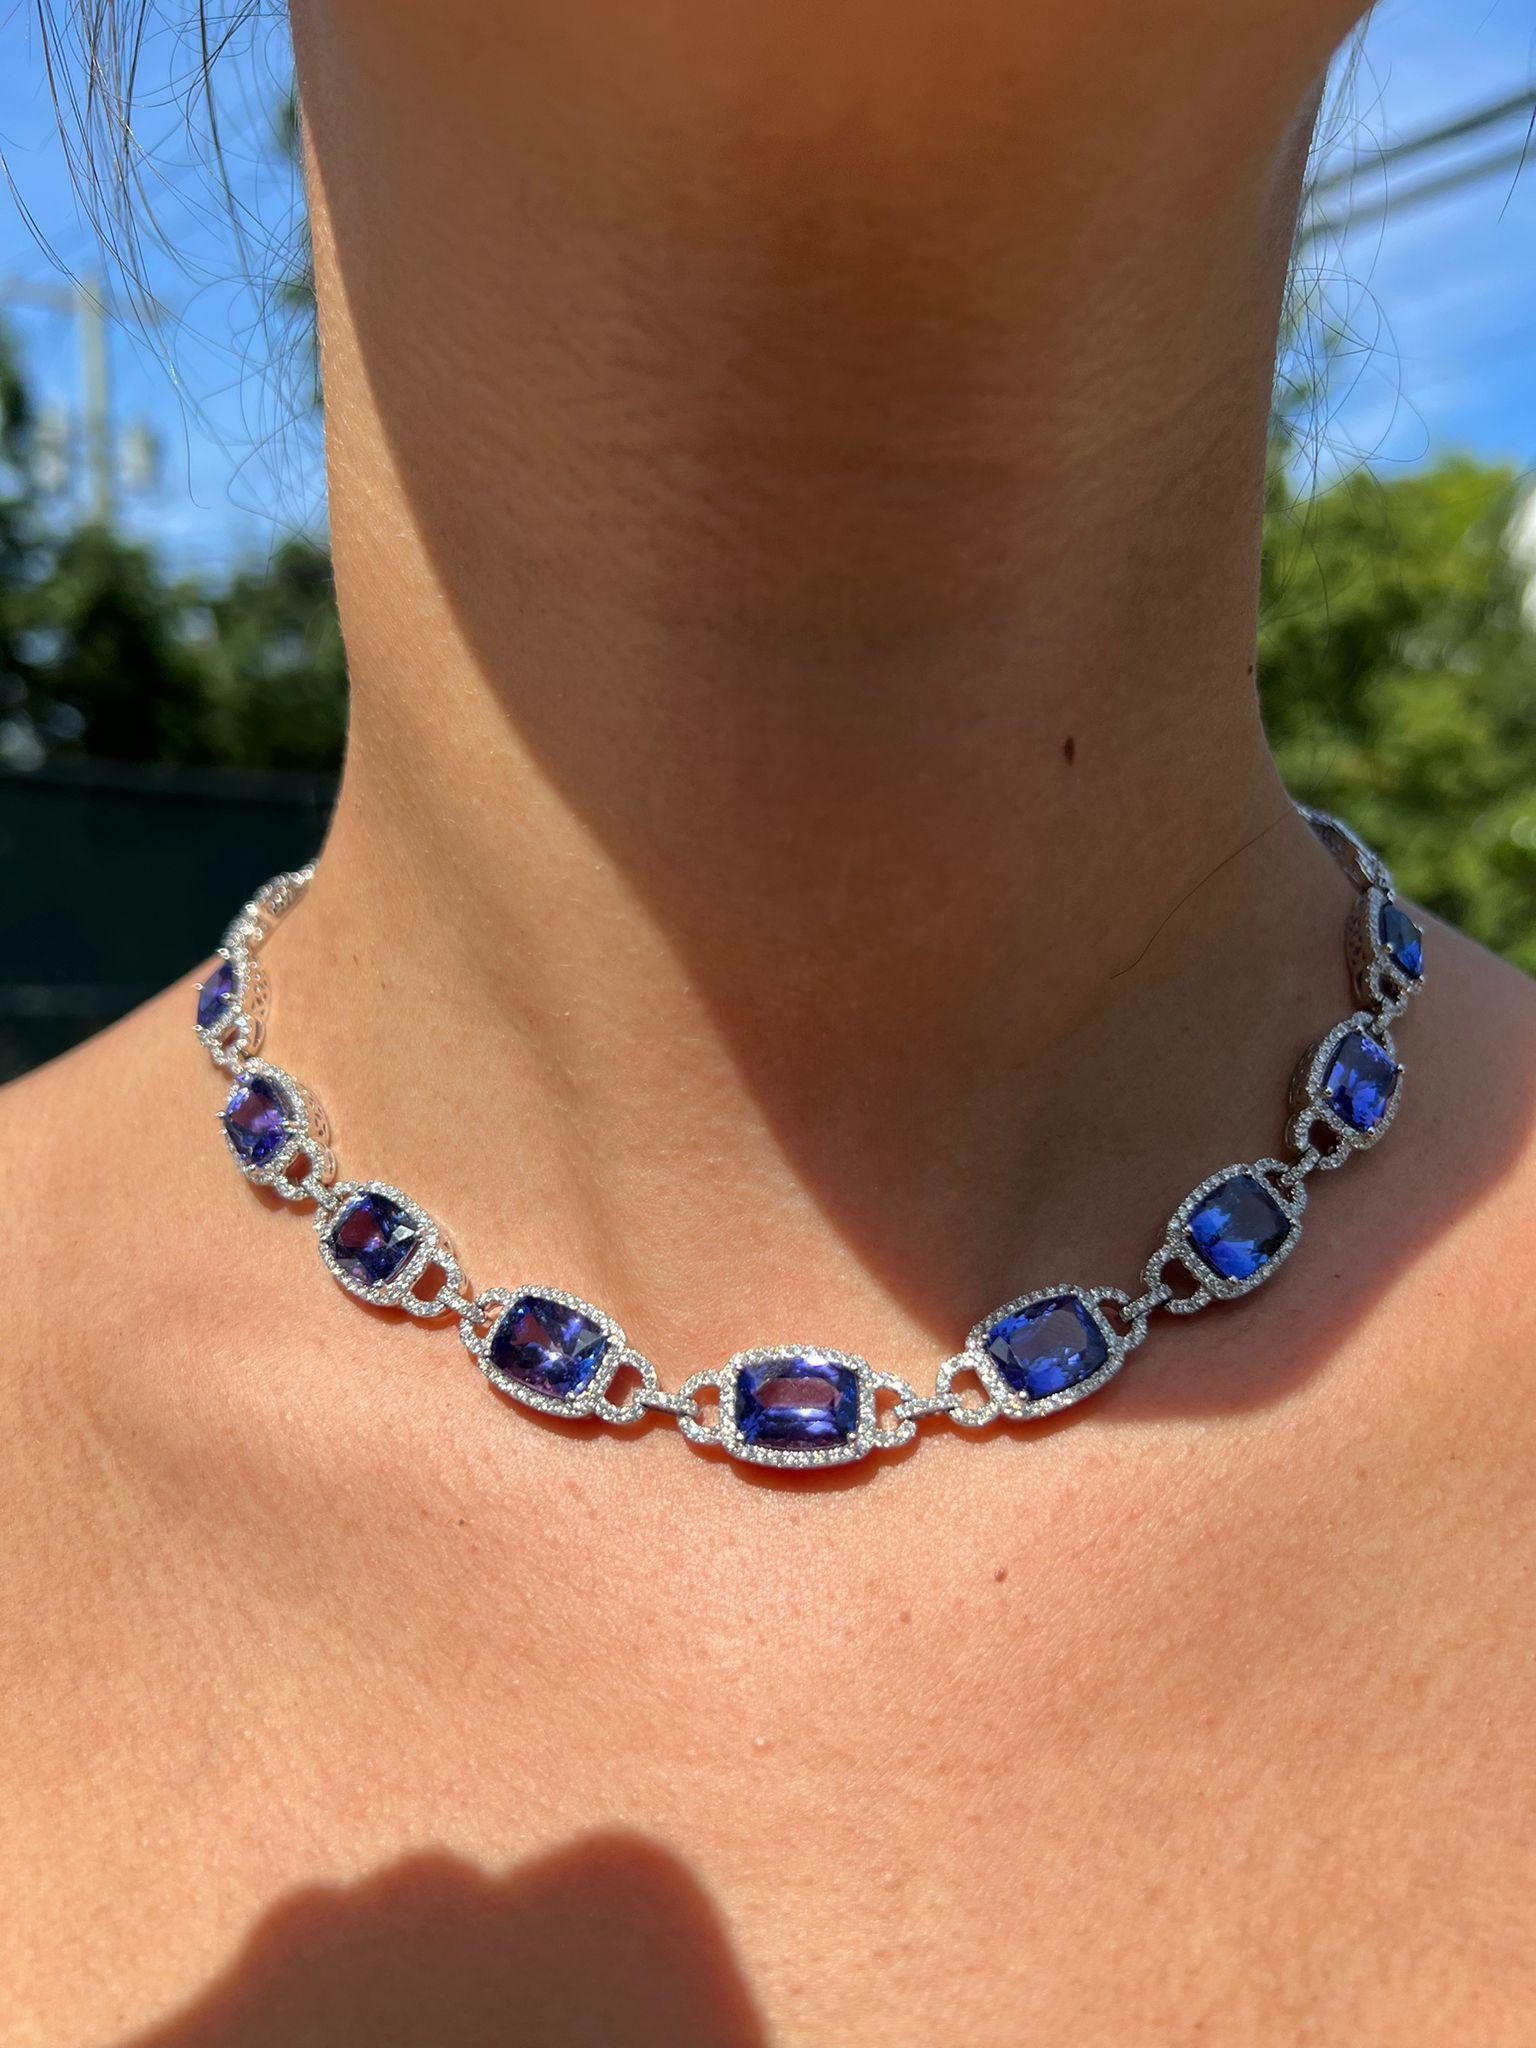 Exquisite 14 Karat White Gold Cushion Tanzanite Necklace - Vivid AAA Quality For Sale 3